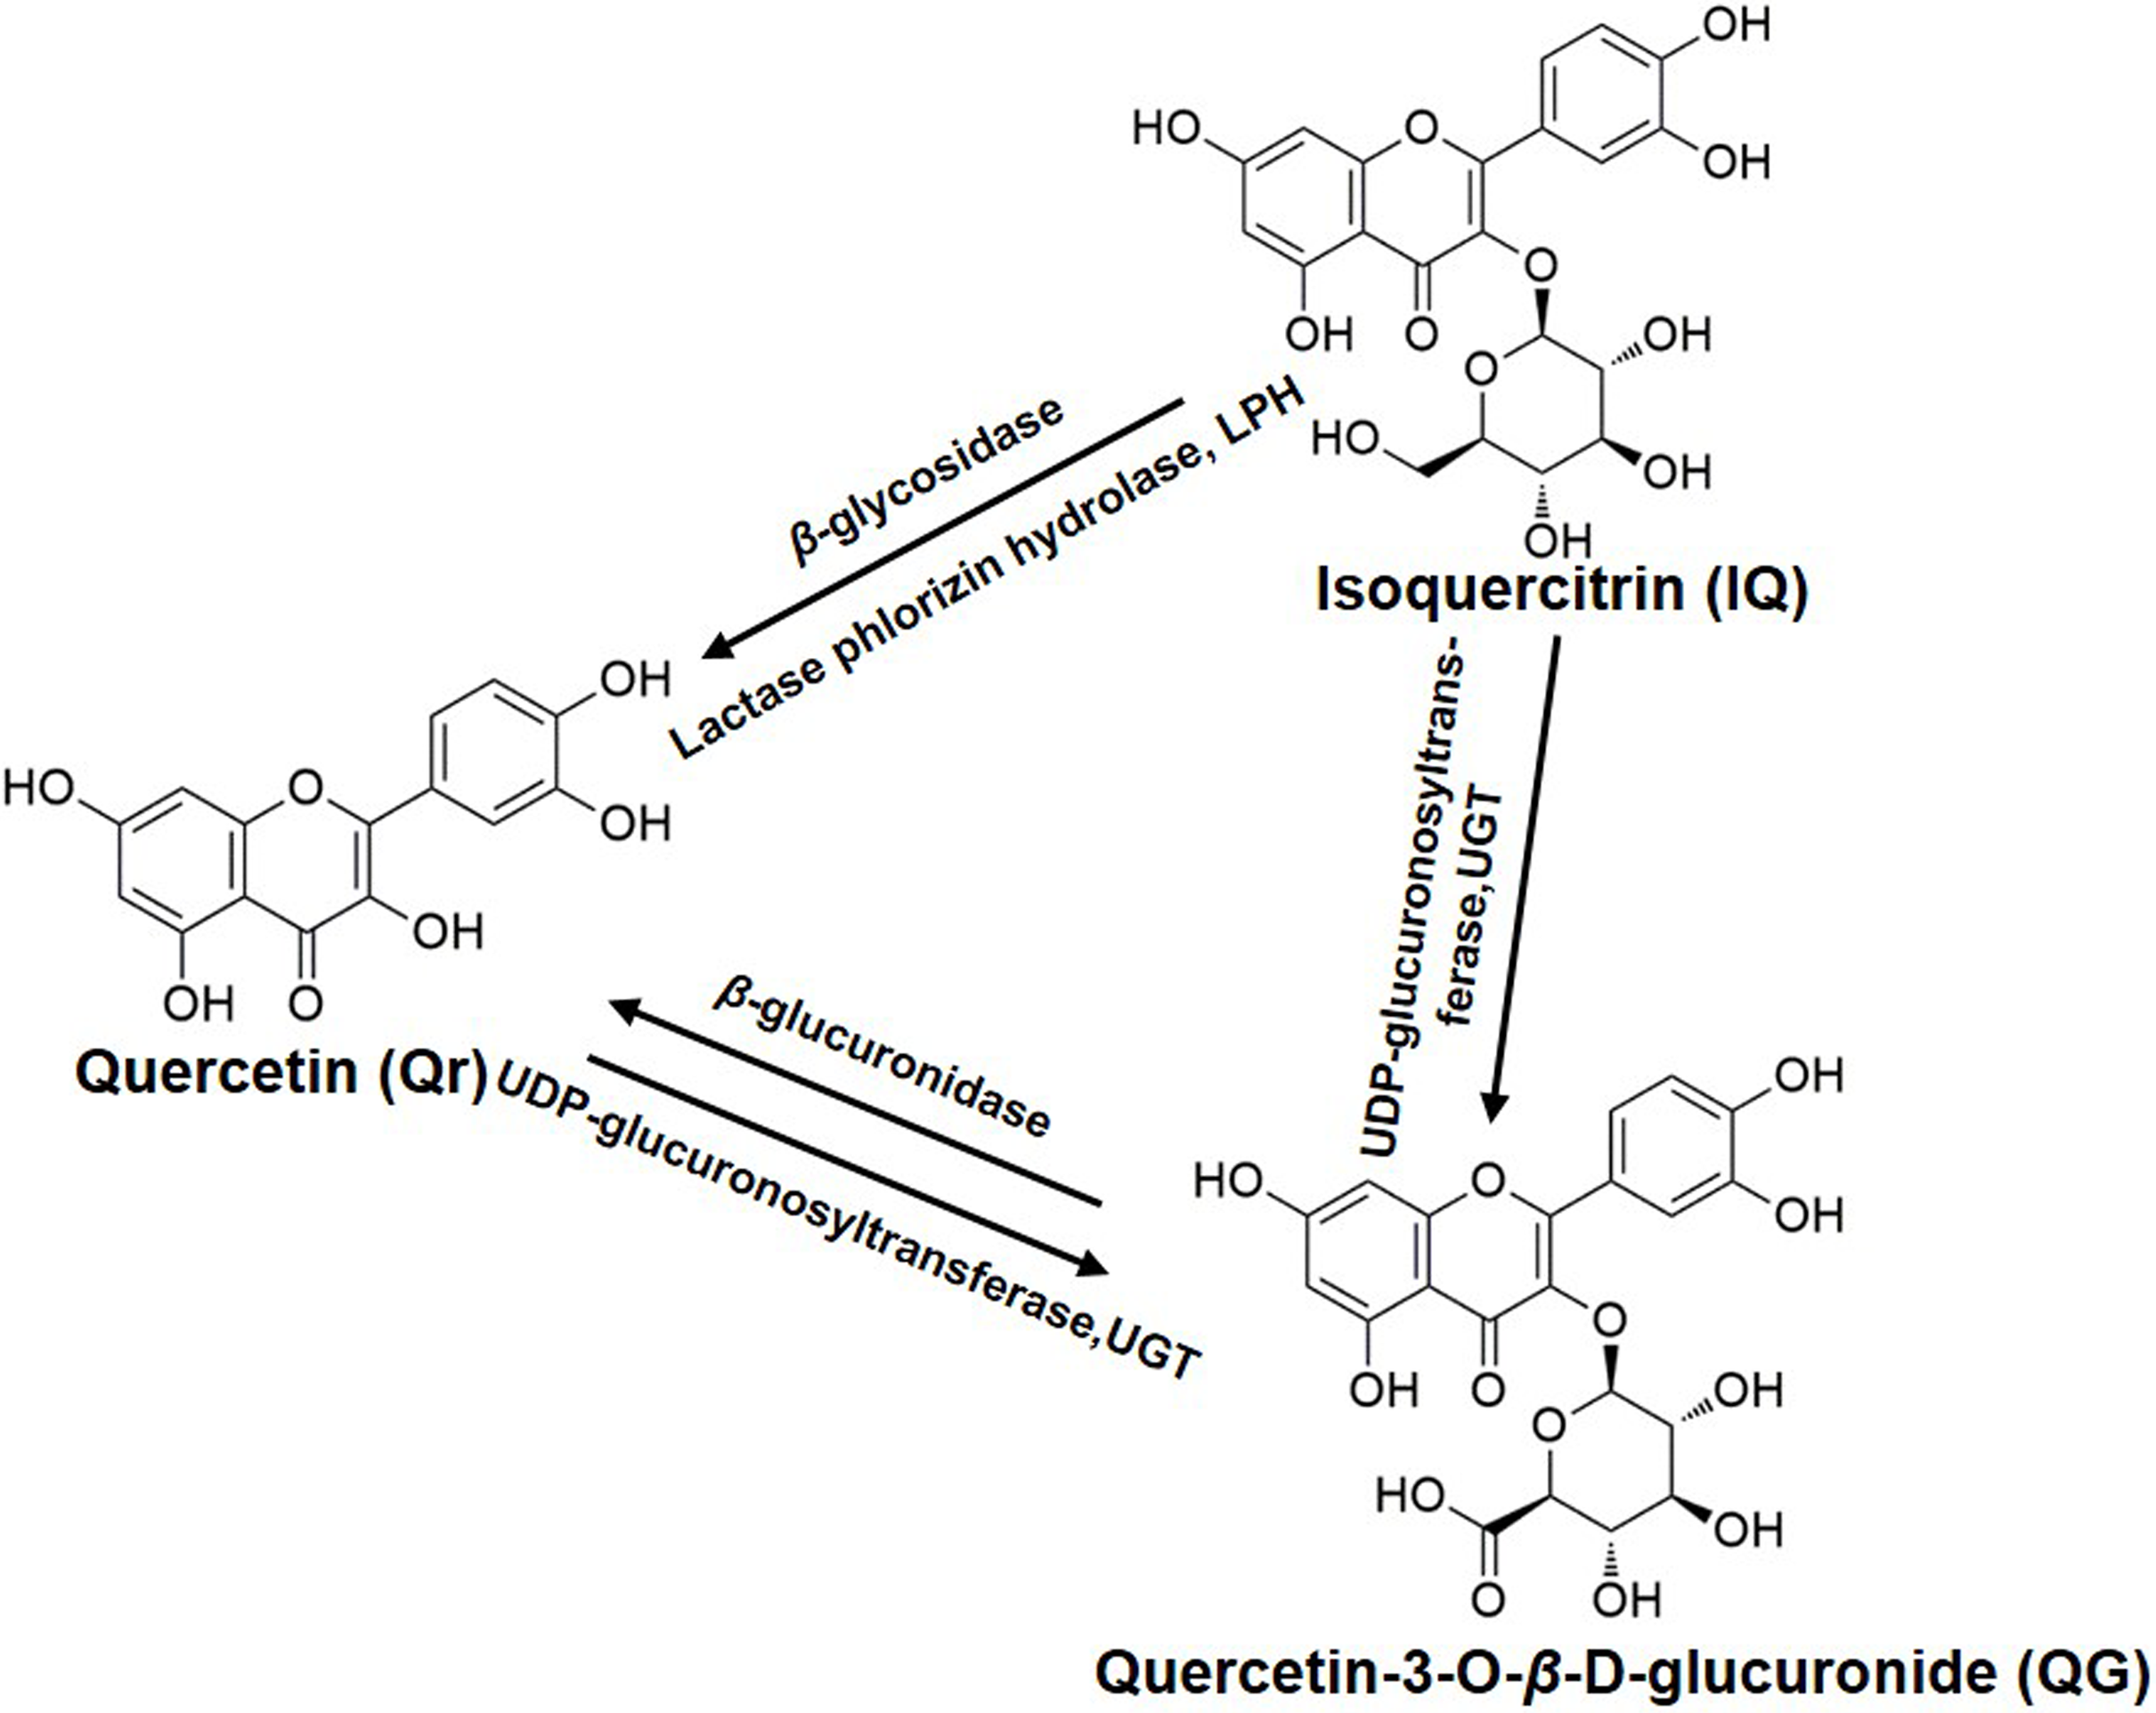 Pharmacokinetic comparison of quercetin, isoquercitrin, and 